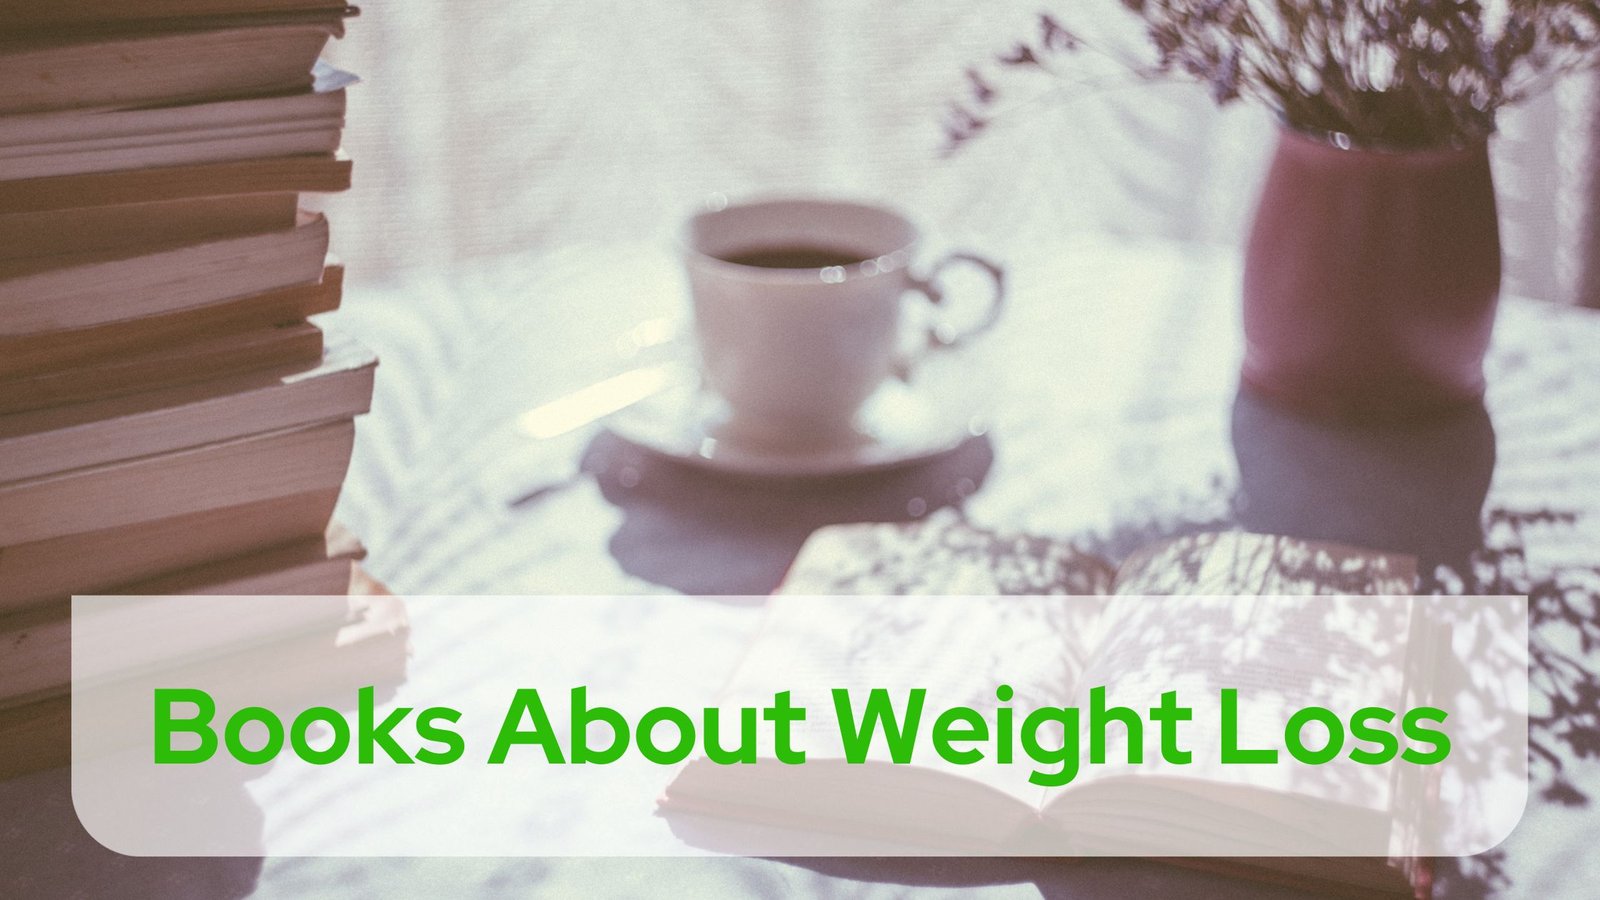 Books About Weight Loss